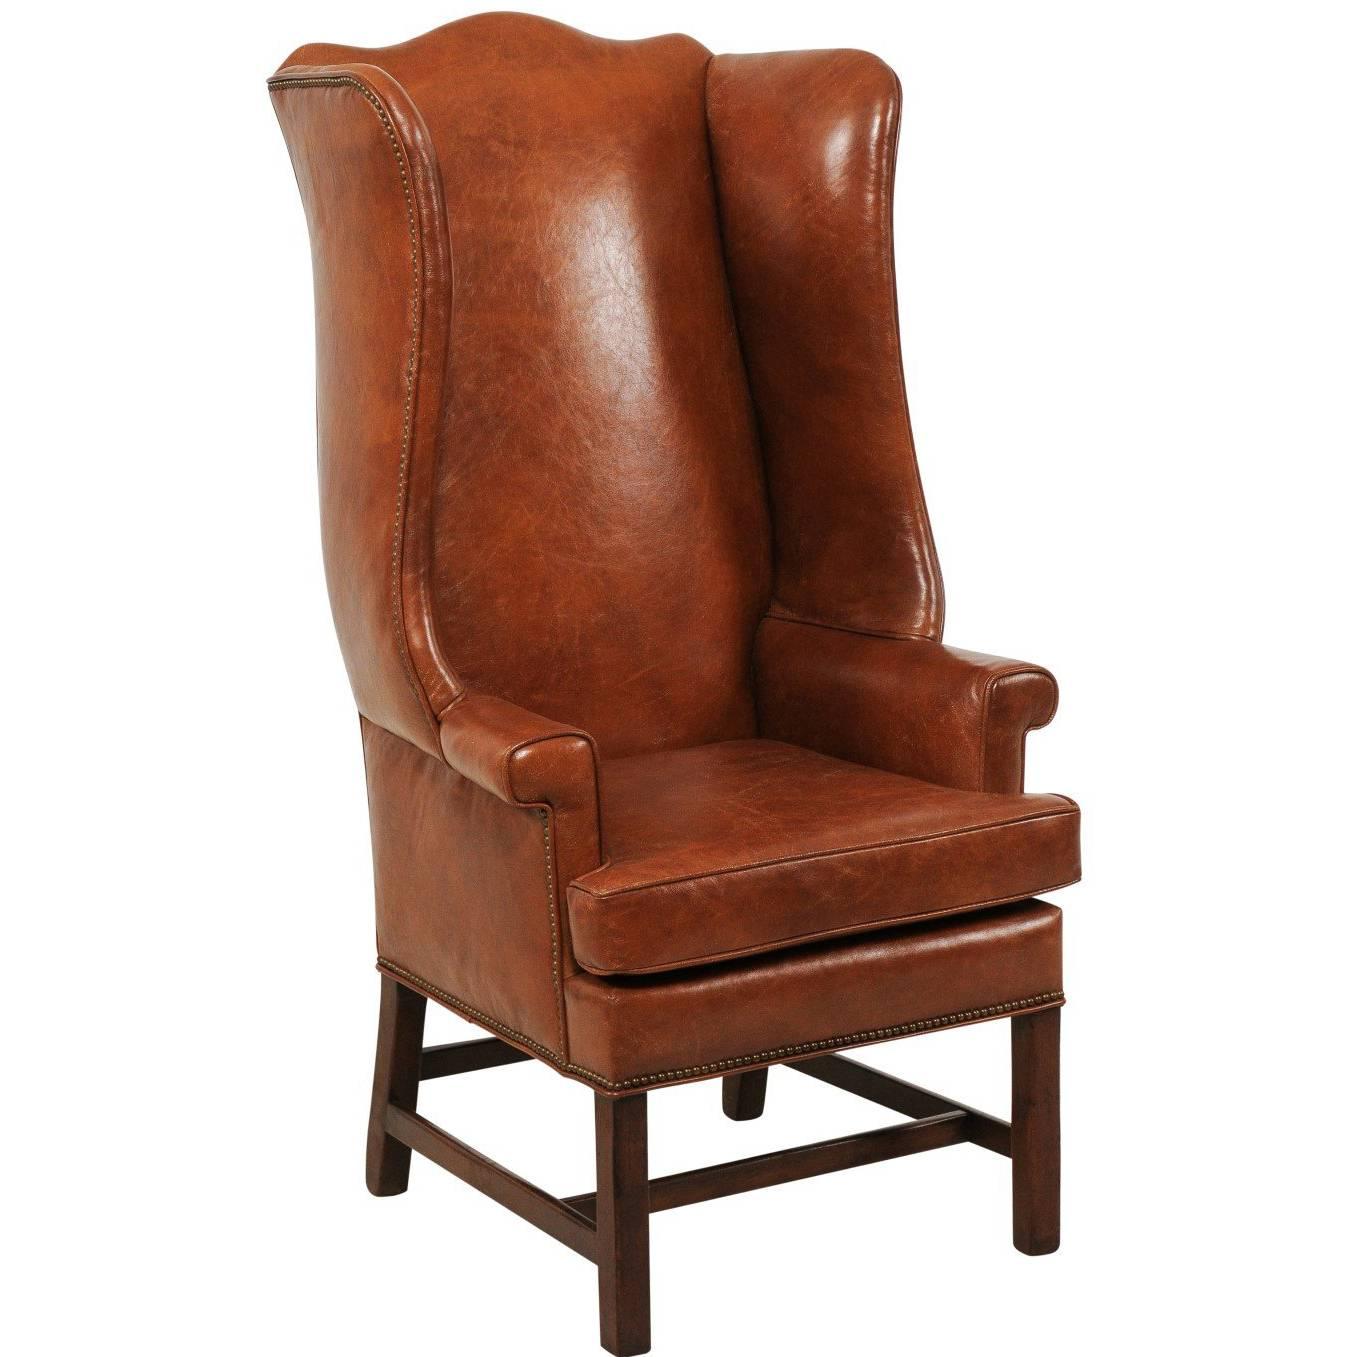 Vintage English Midcentury Brown Leather Wingback Chair with Brass Nailhead  Trim For Sale at 1stdibs